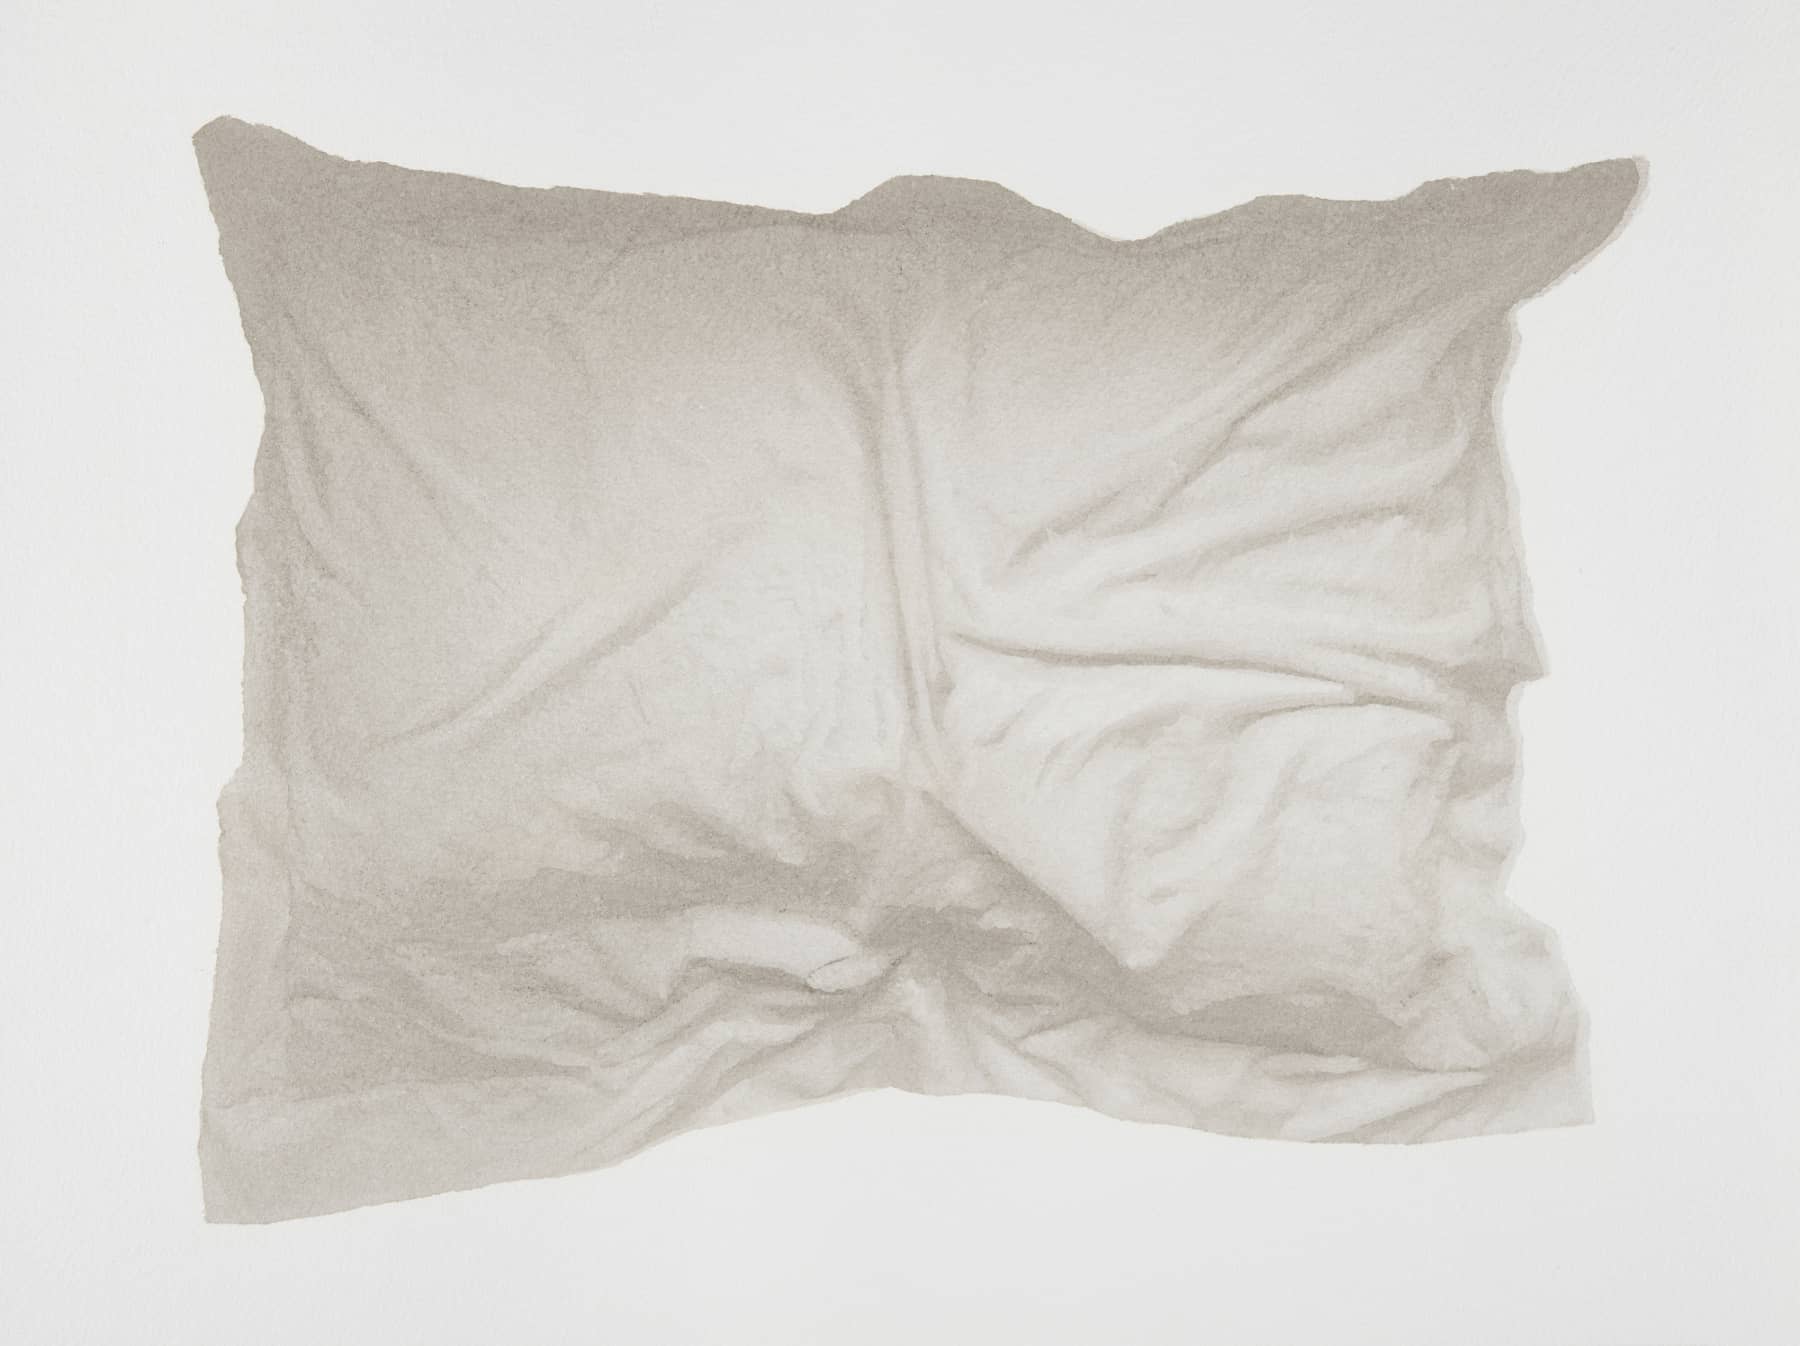 1_Jonathan Rosic_Untitled (Pillow 2)_2019_indian ink on paper_35x45cm